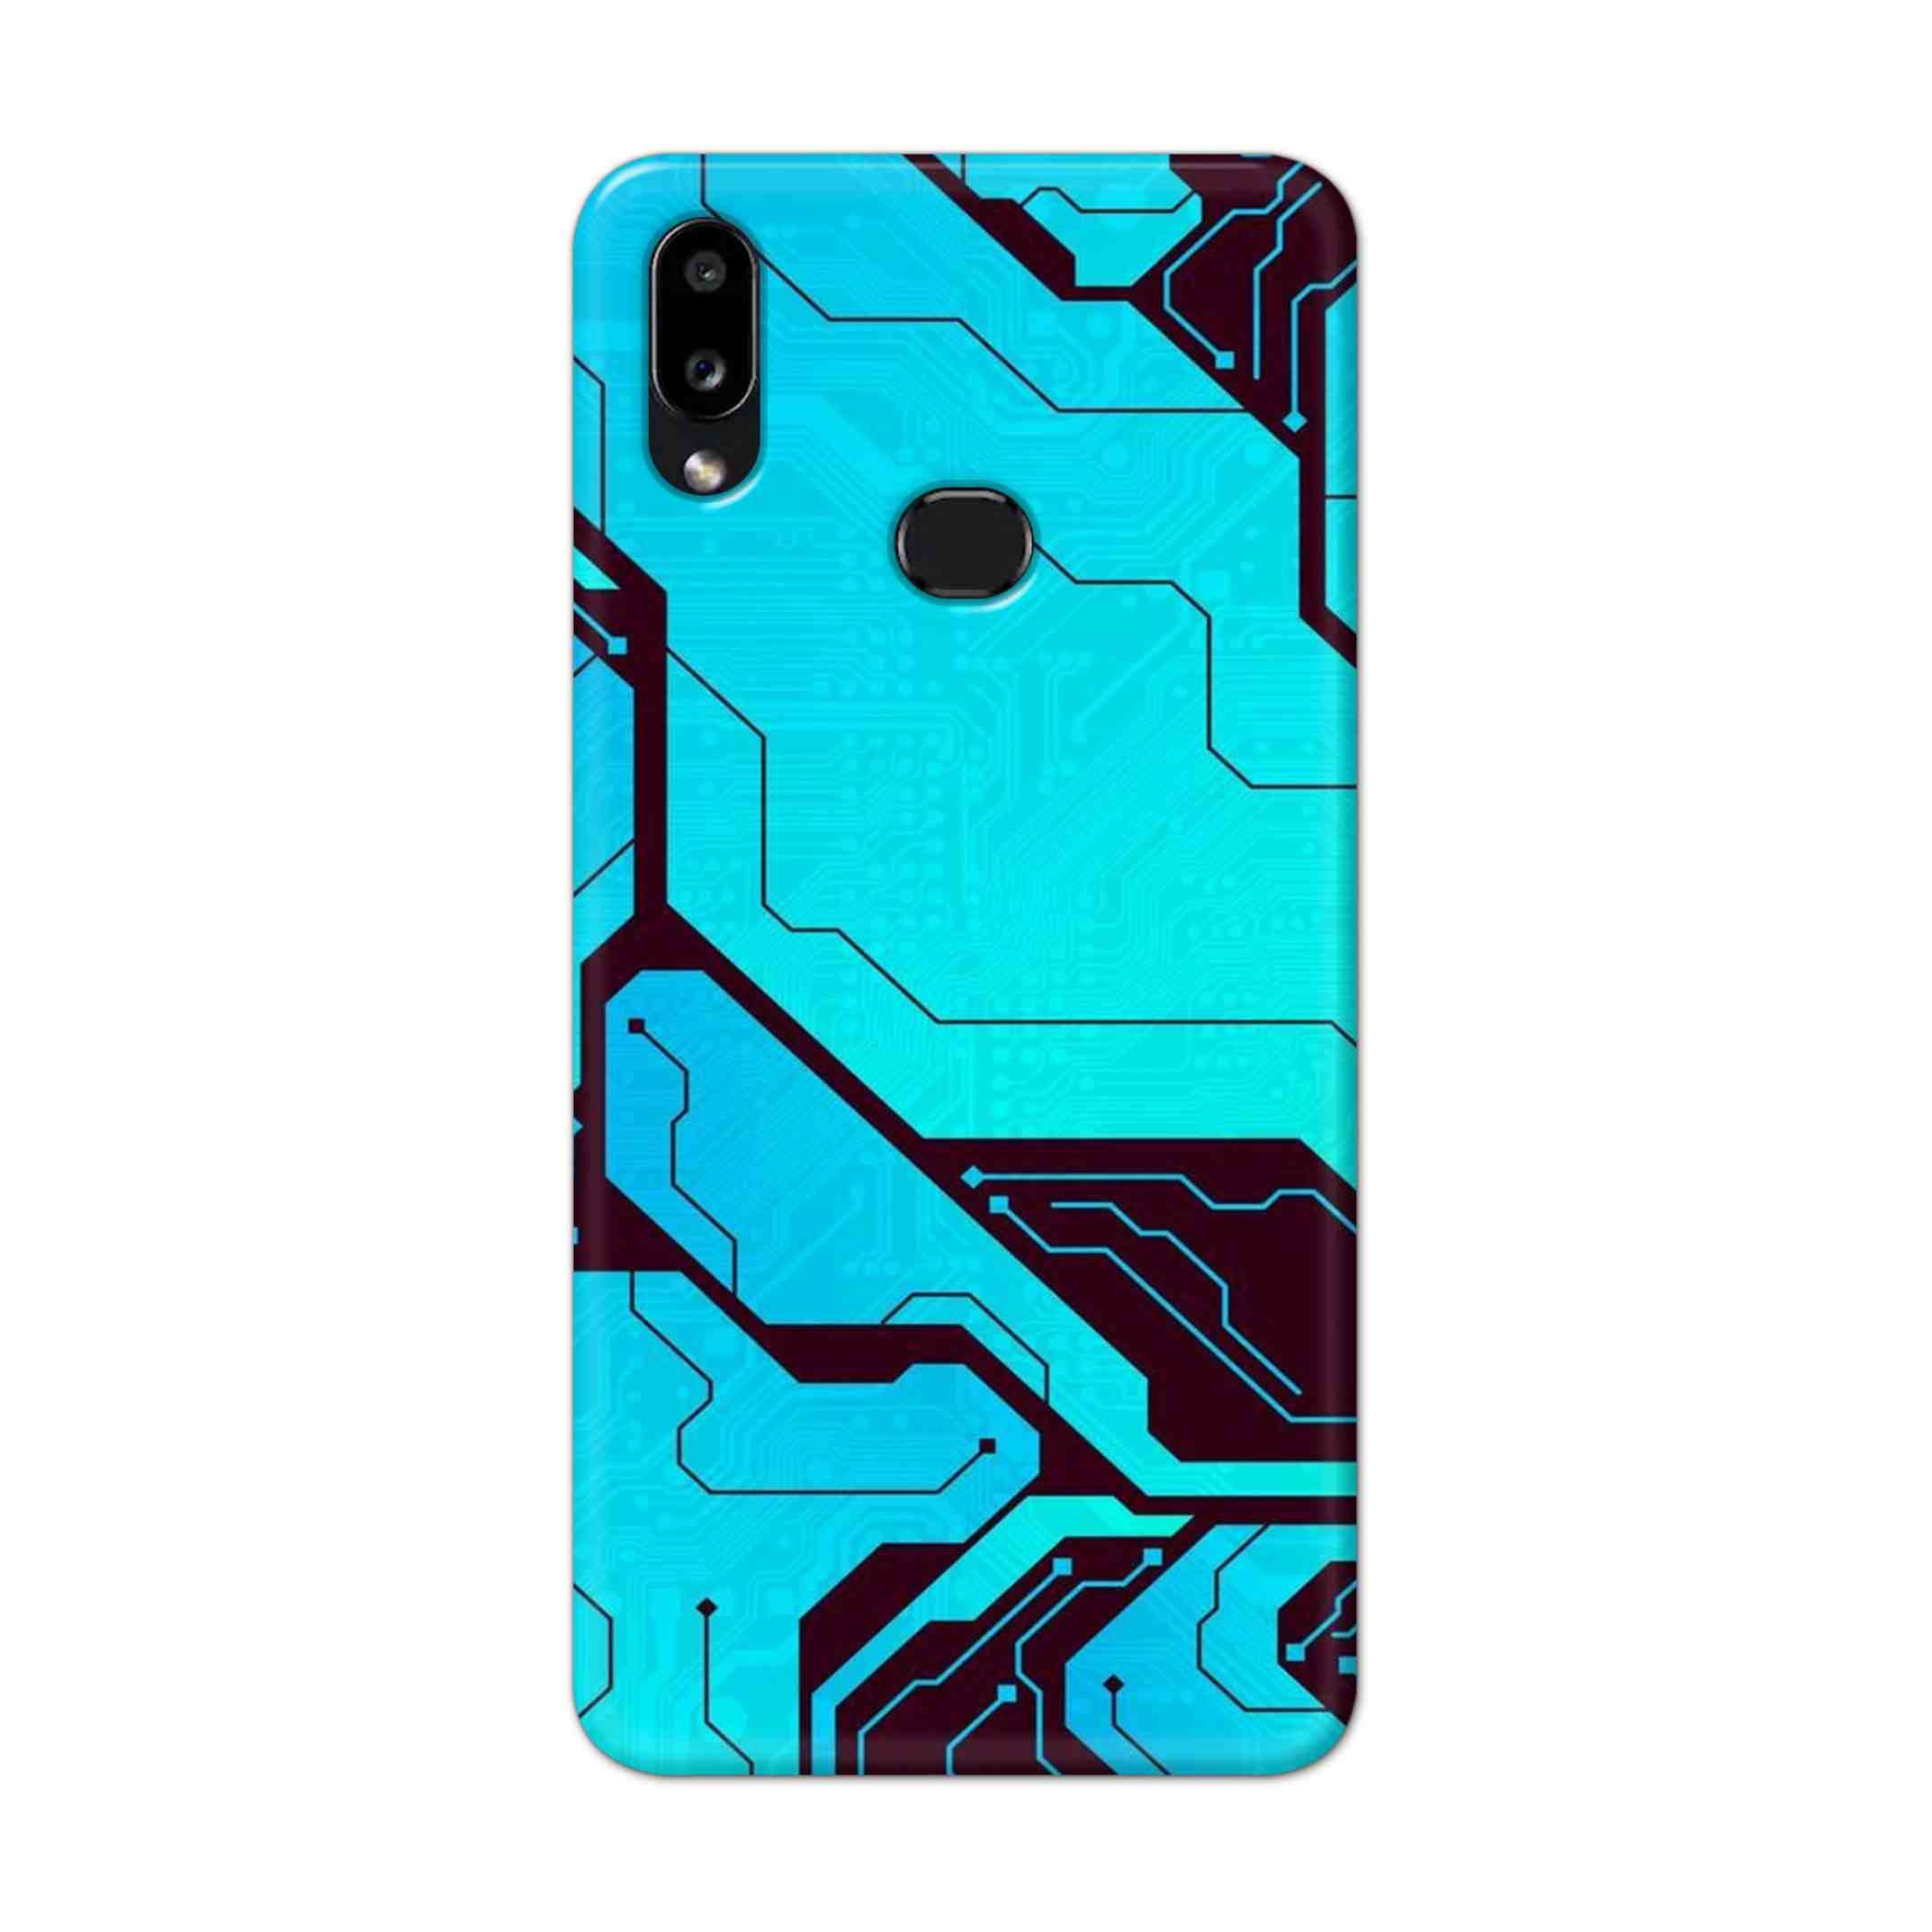 Buy Futuristic Line Hard Back Mobile Phone Case Cover For Samsung Galaxy M01s Online